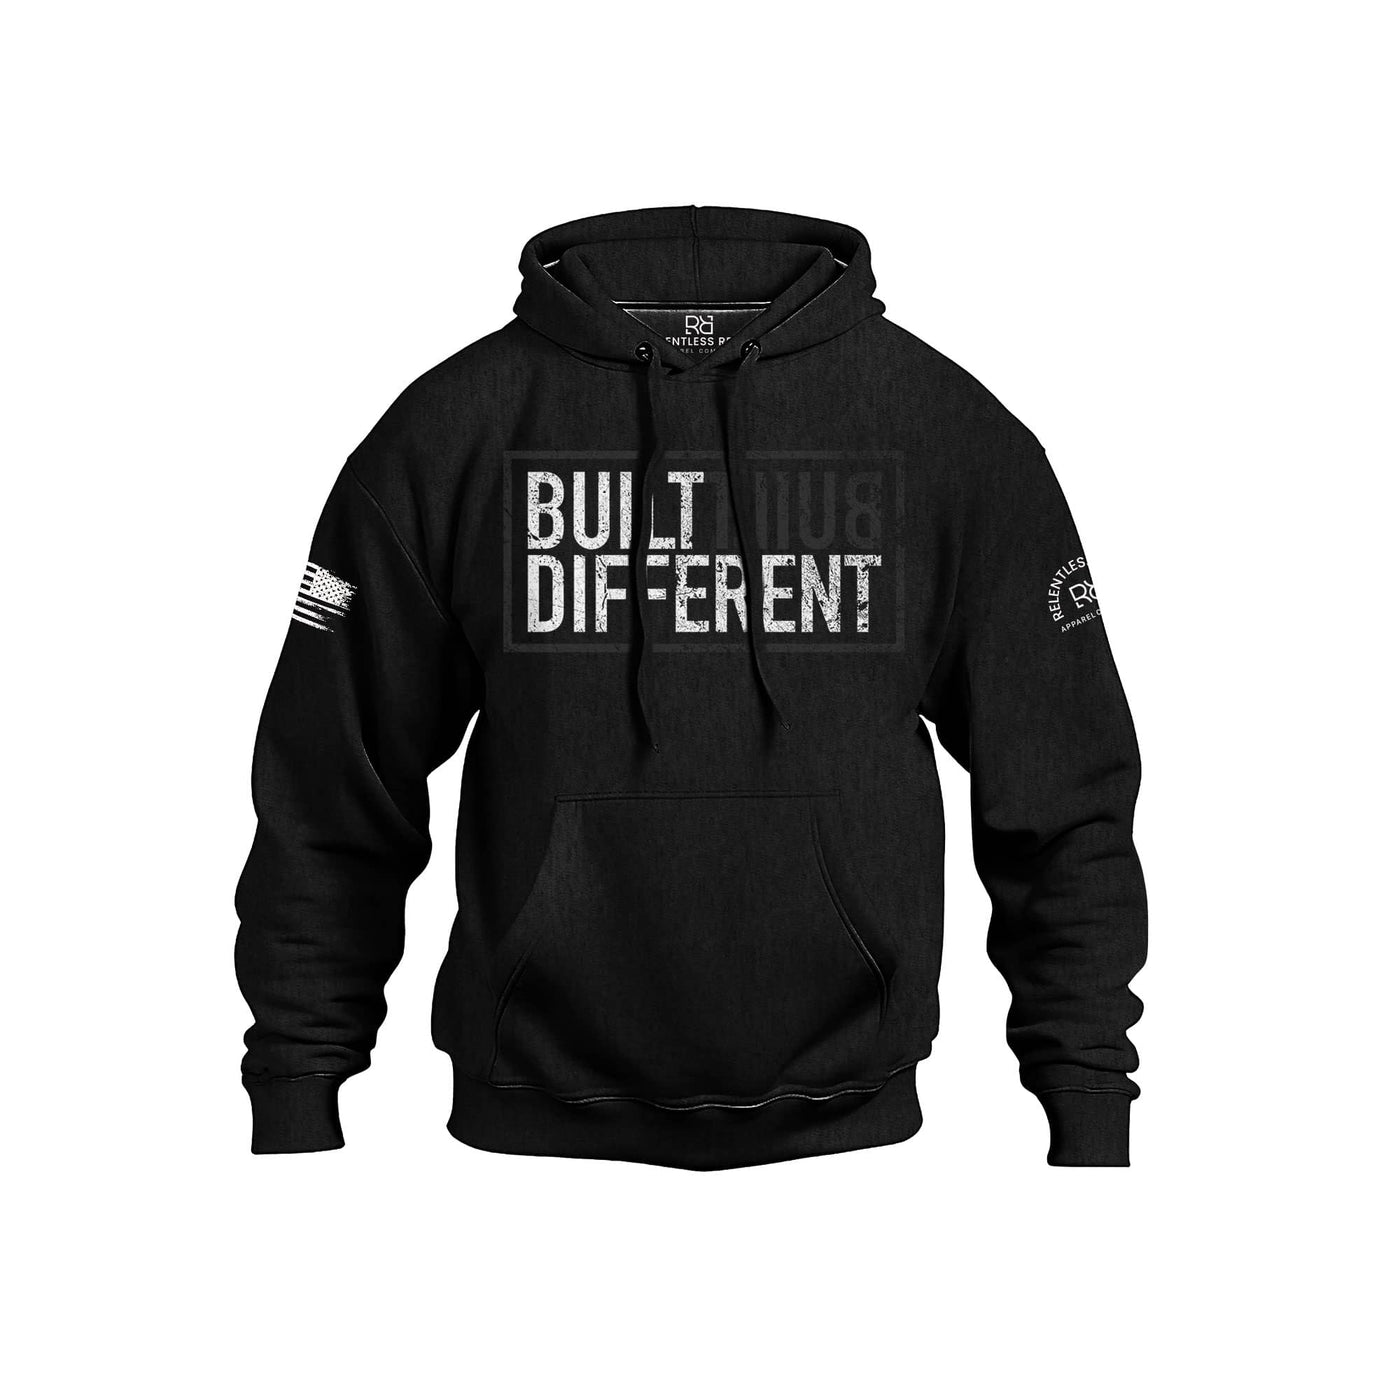 Built Different Heavyweight solid black hoodie